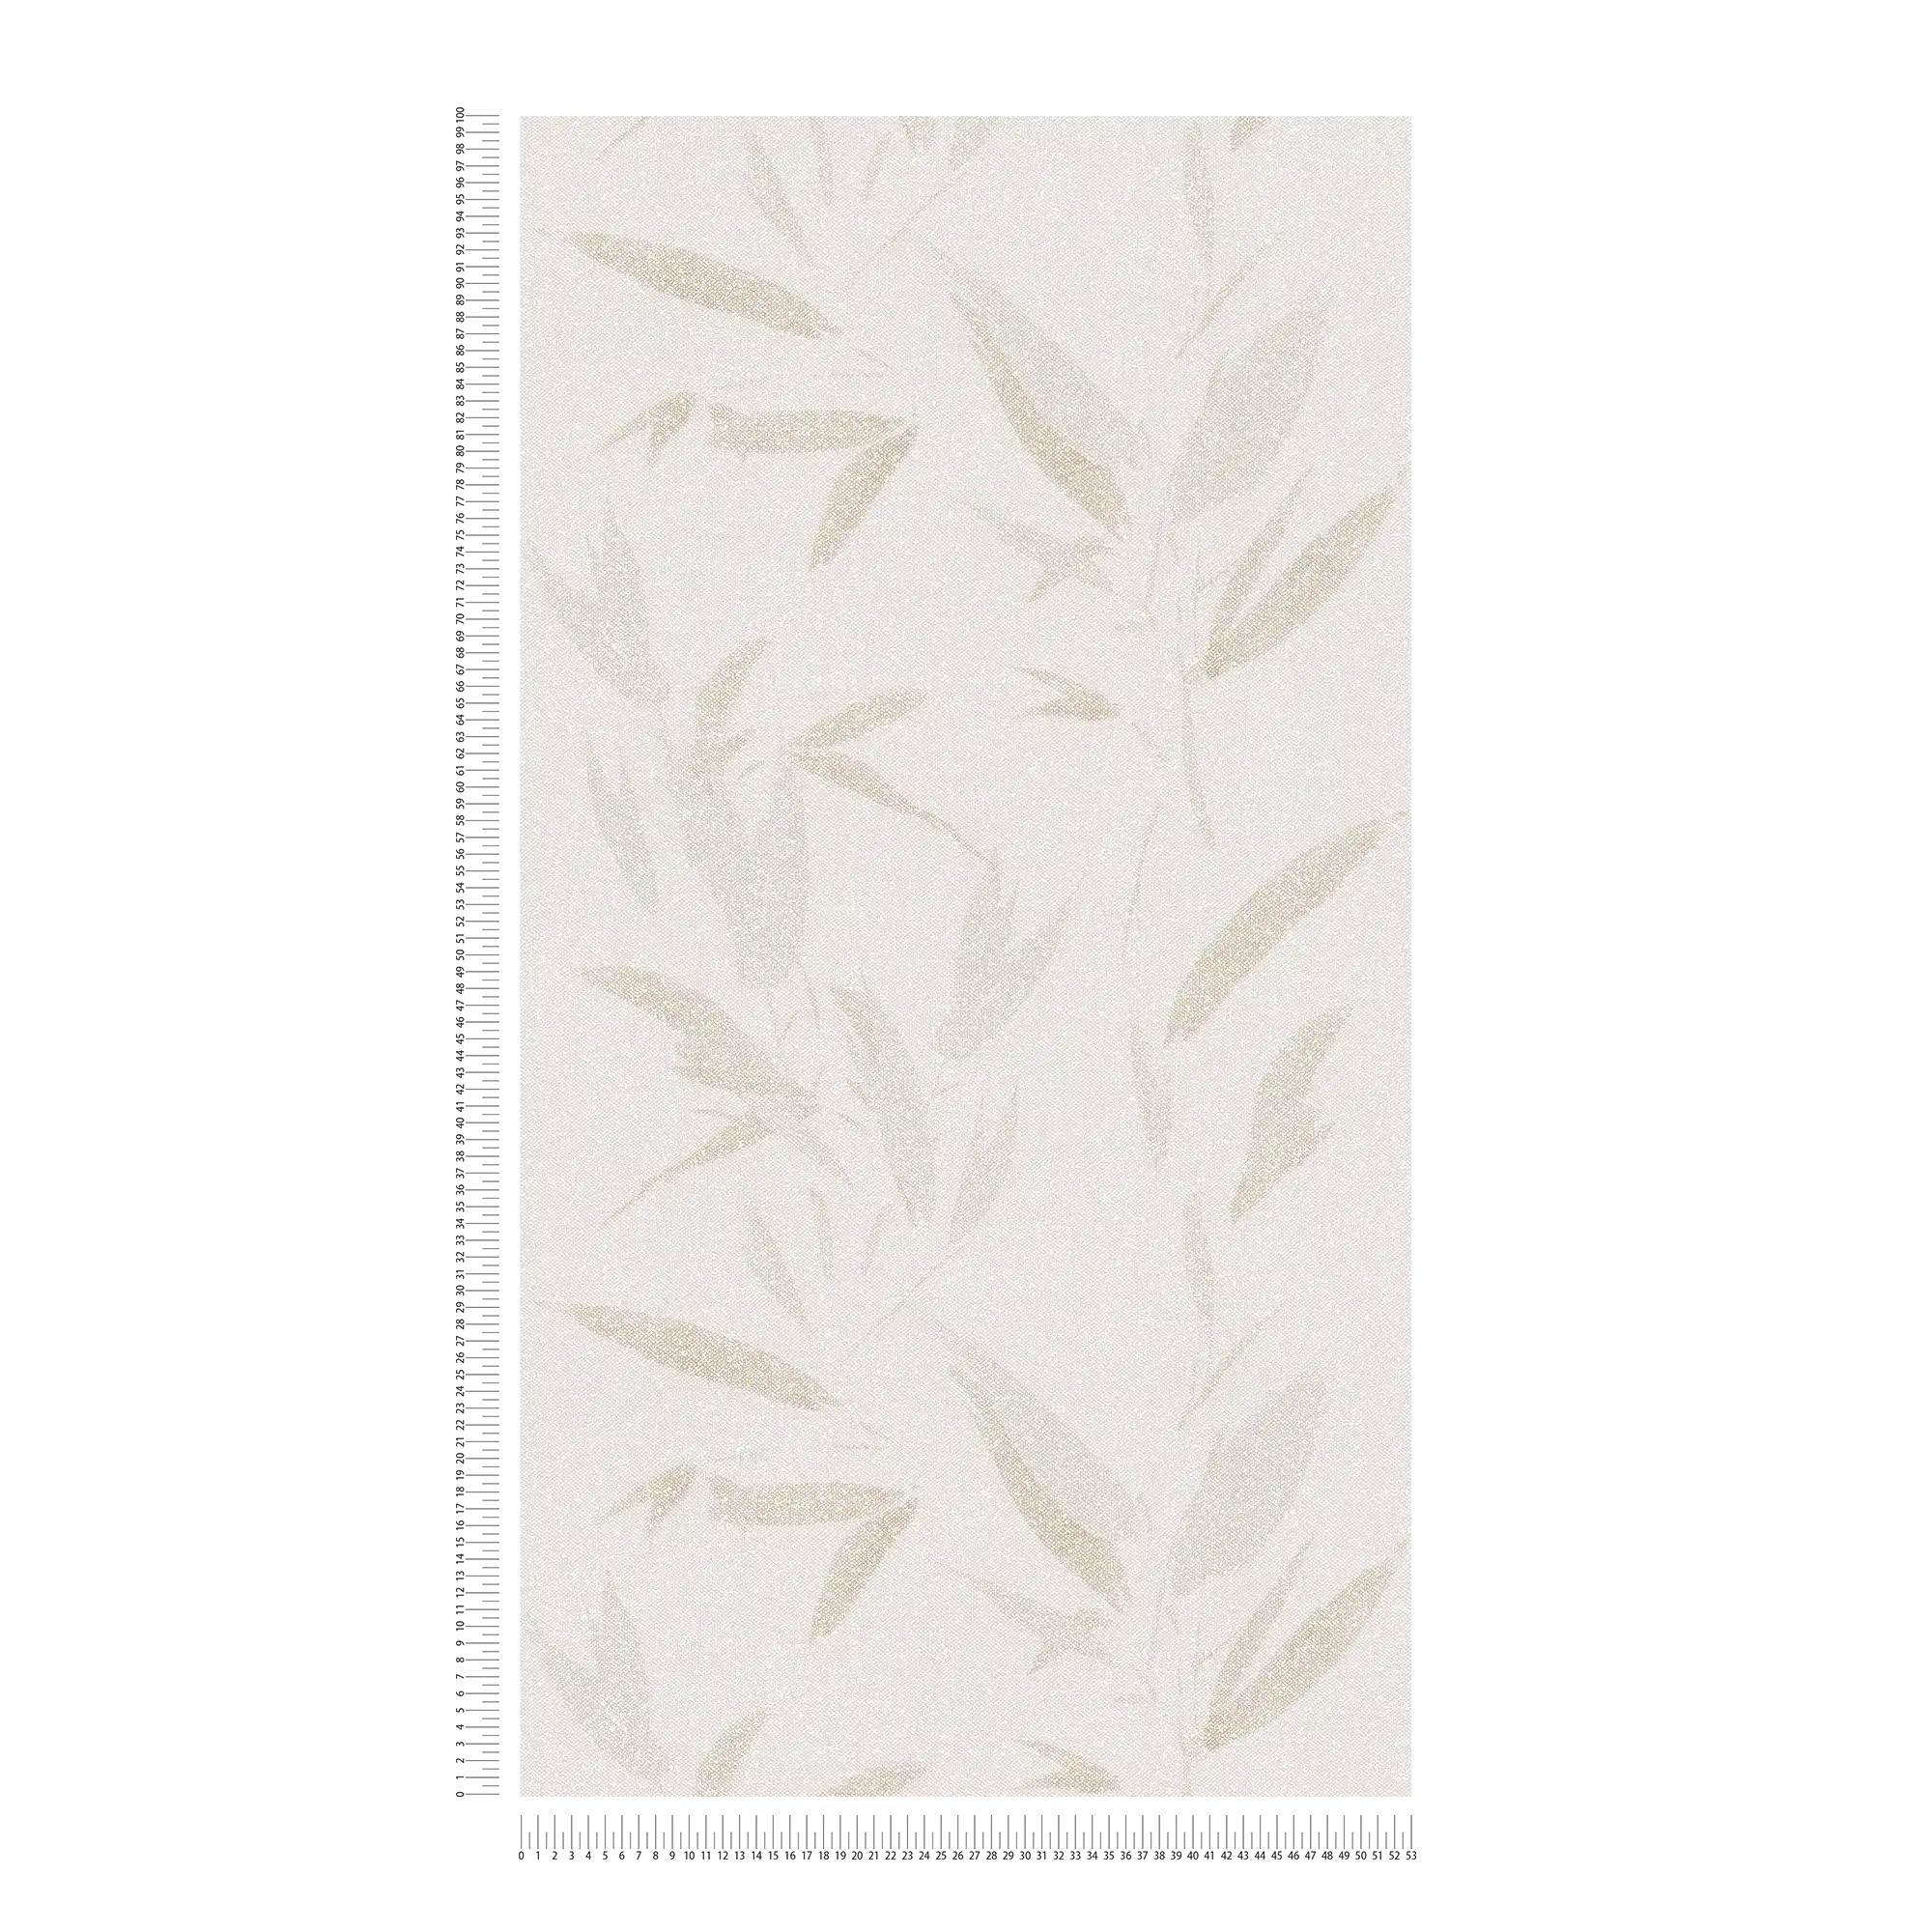             Non-woven wallpaper leaf motif abstract, textile look - cream, beige
        